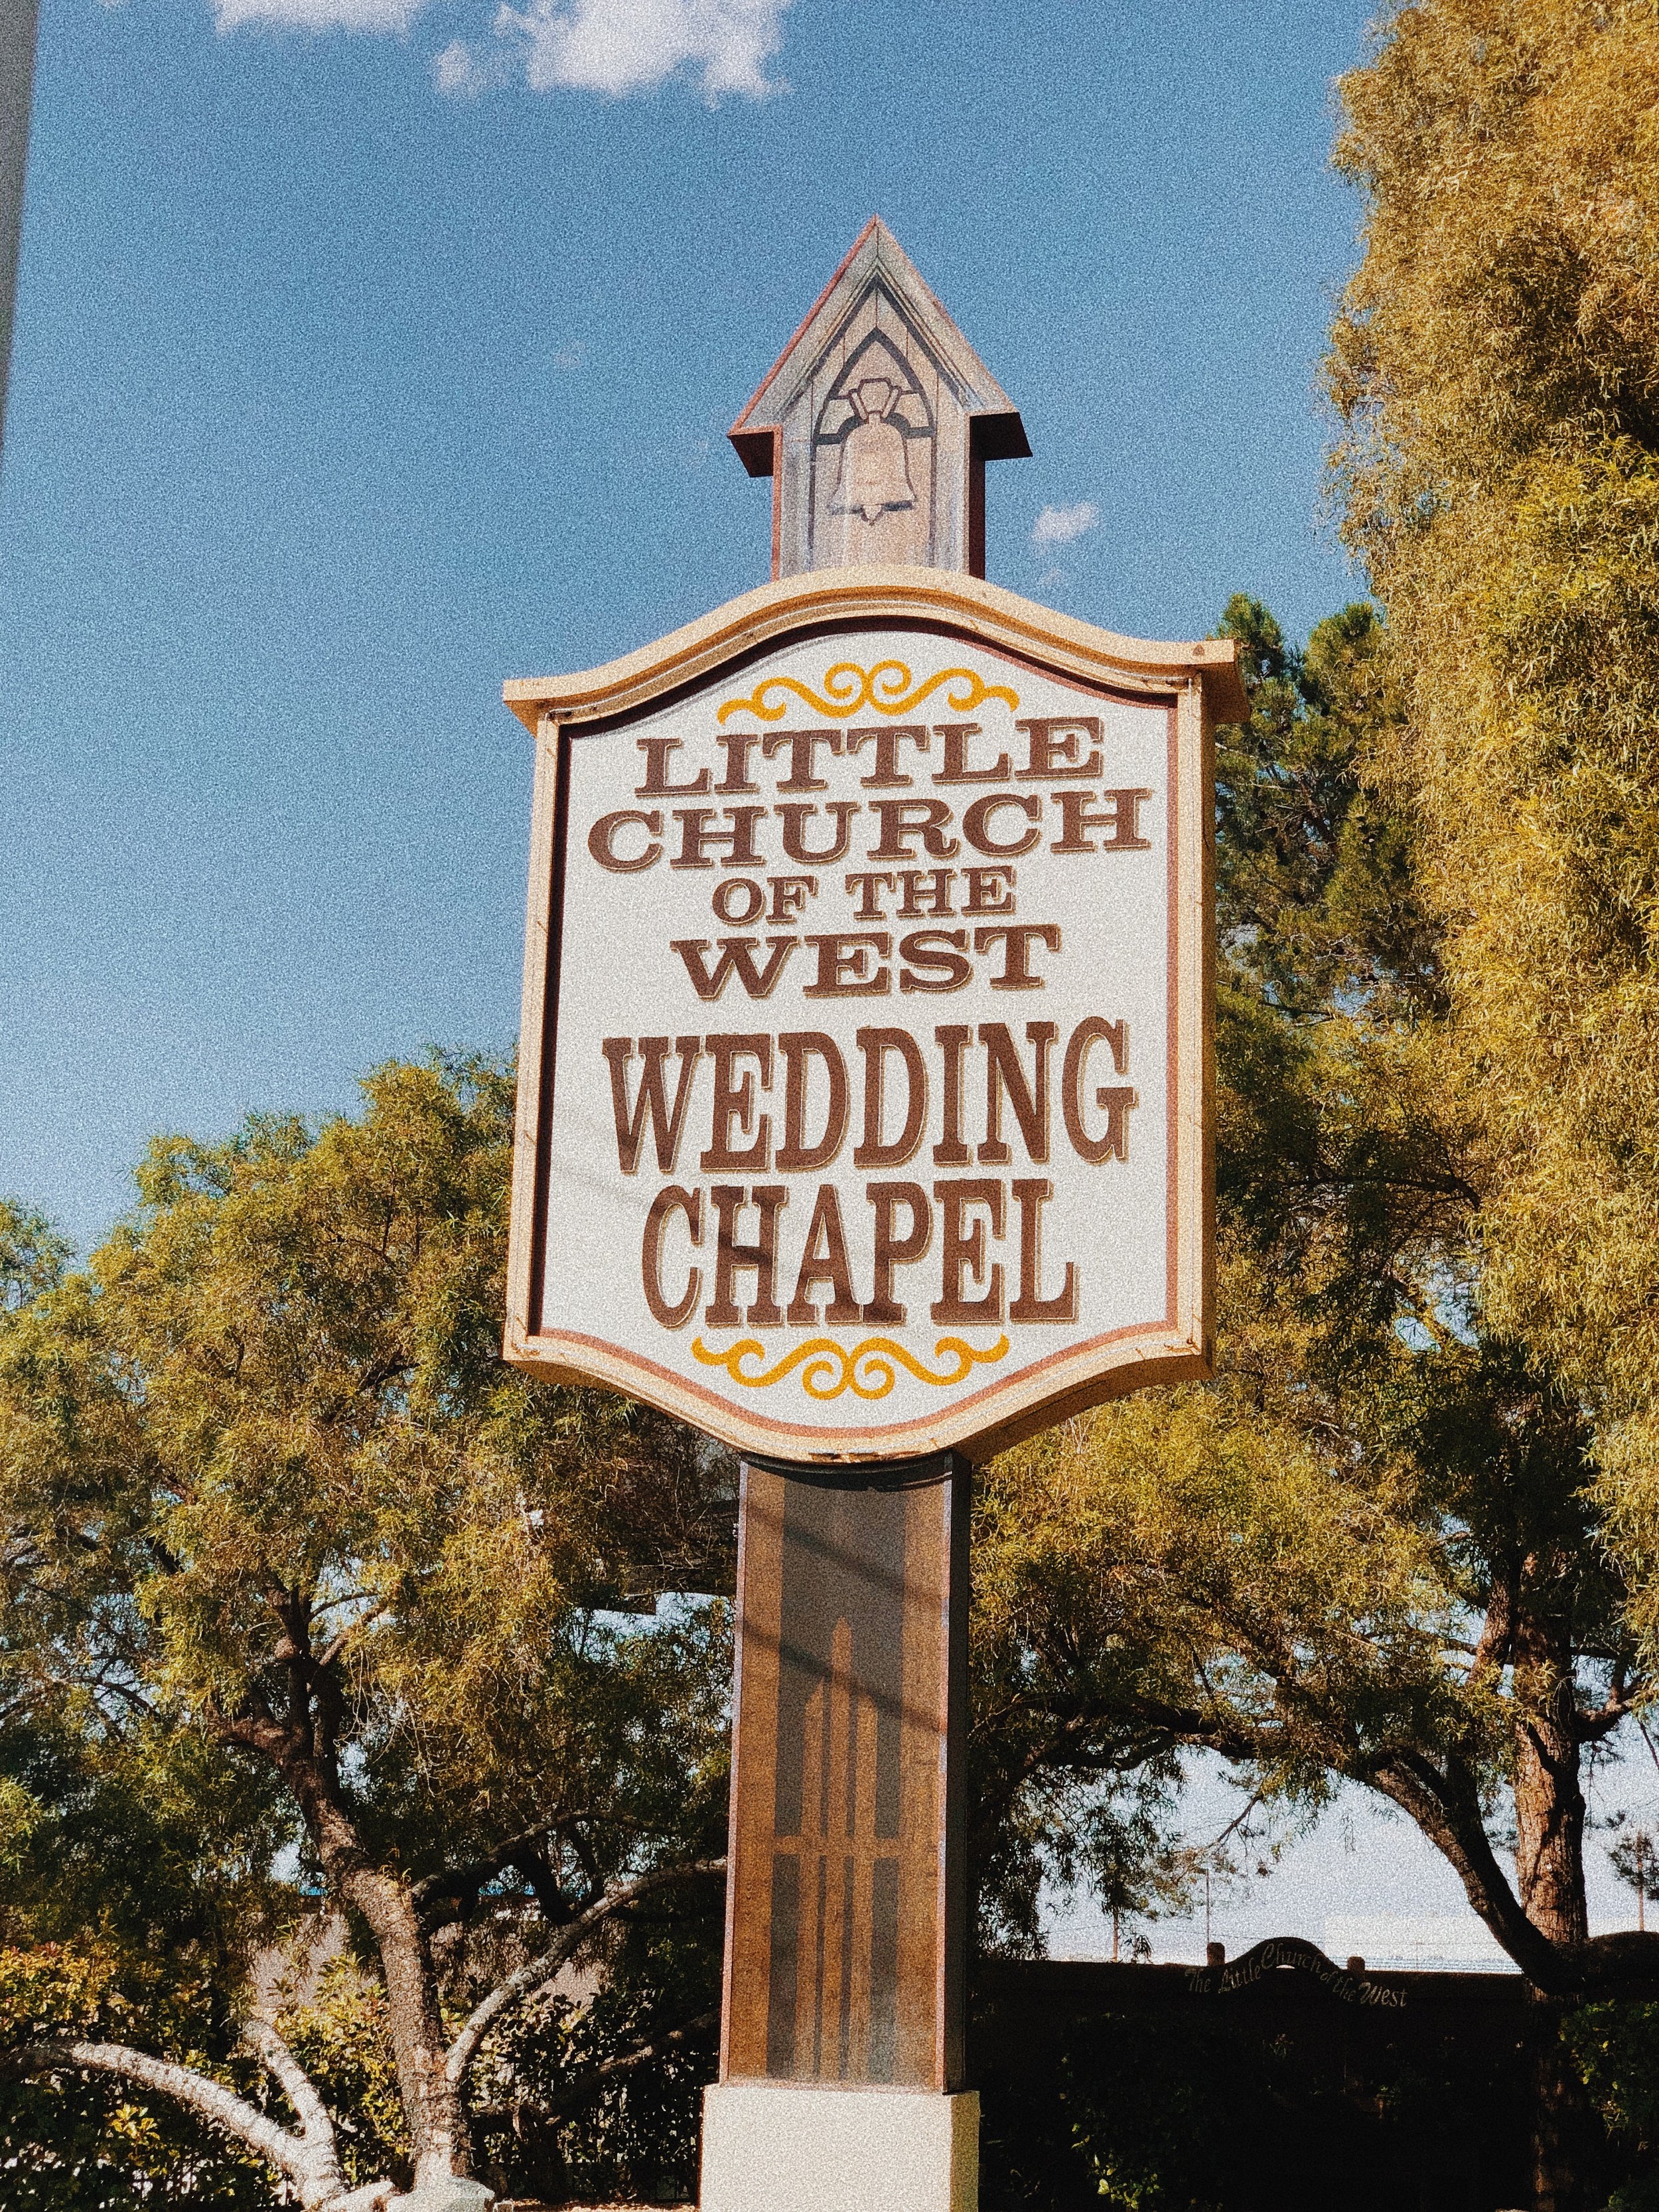 Little church of the west wedding chapel sign